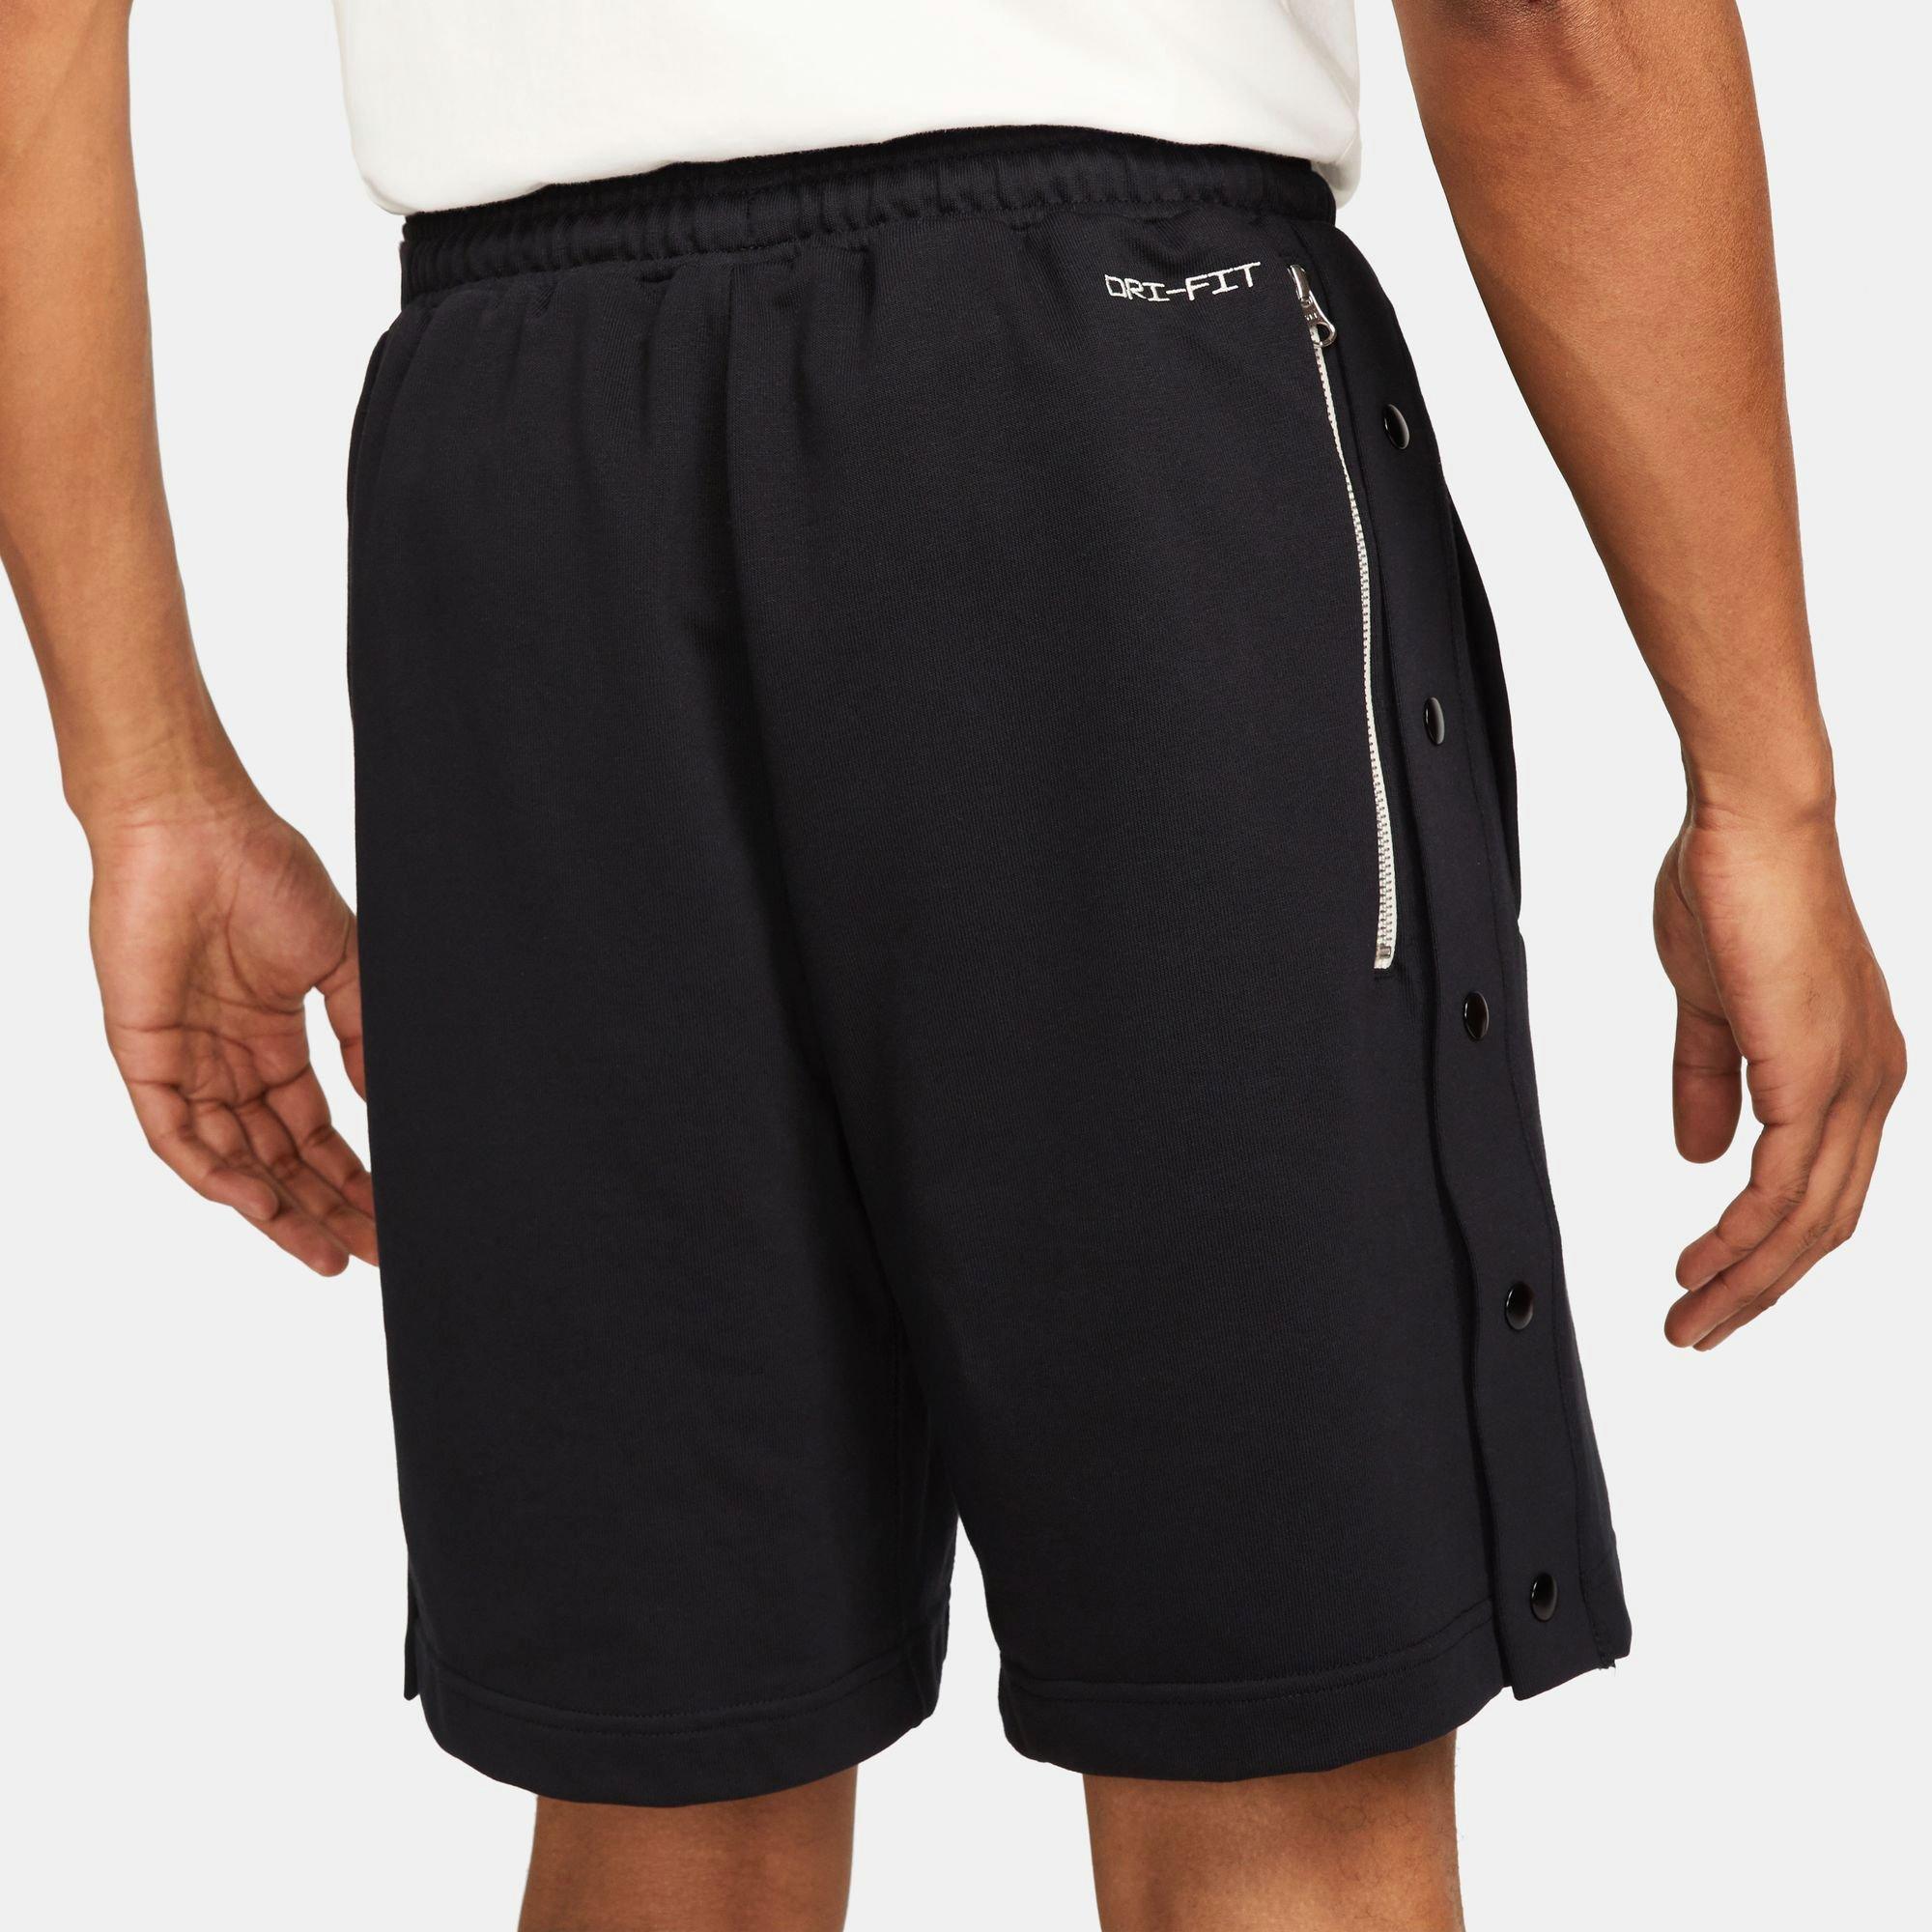 Men's Dri-FIT Standard Issue 8 French Terry Basketball Short from